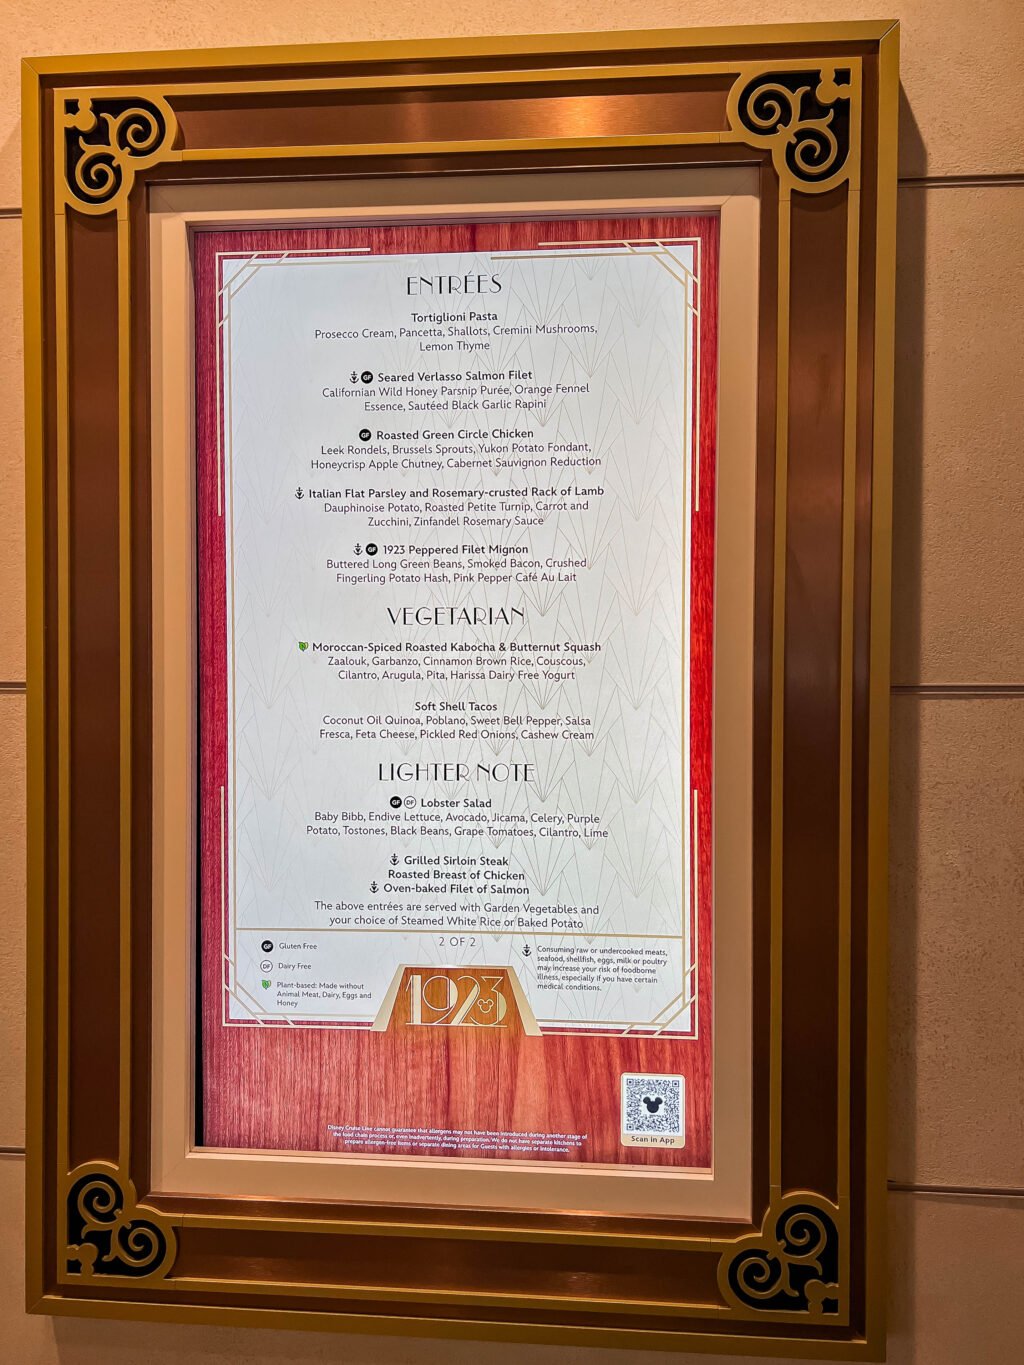 Disney Wish 1923 Menu: sailing soon? This will help you plan your dinner at 1923!